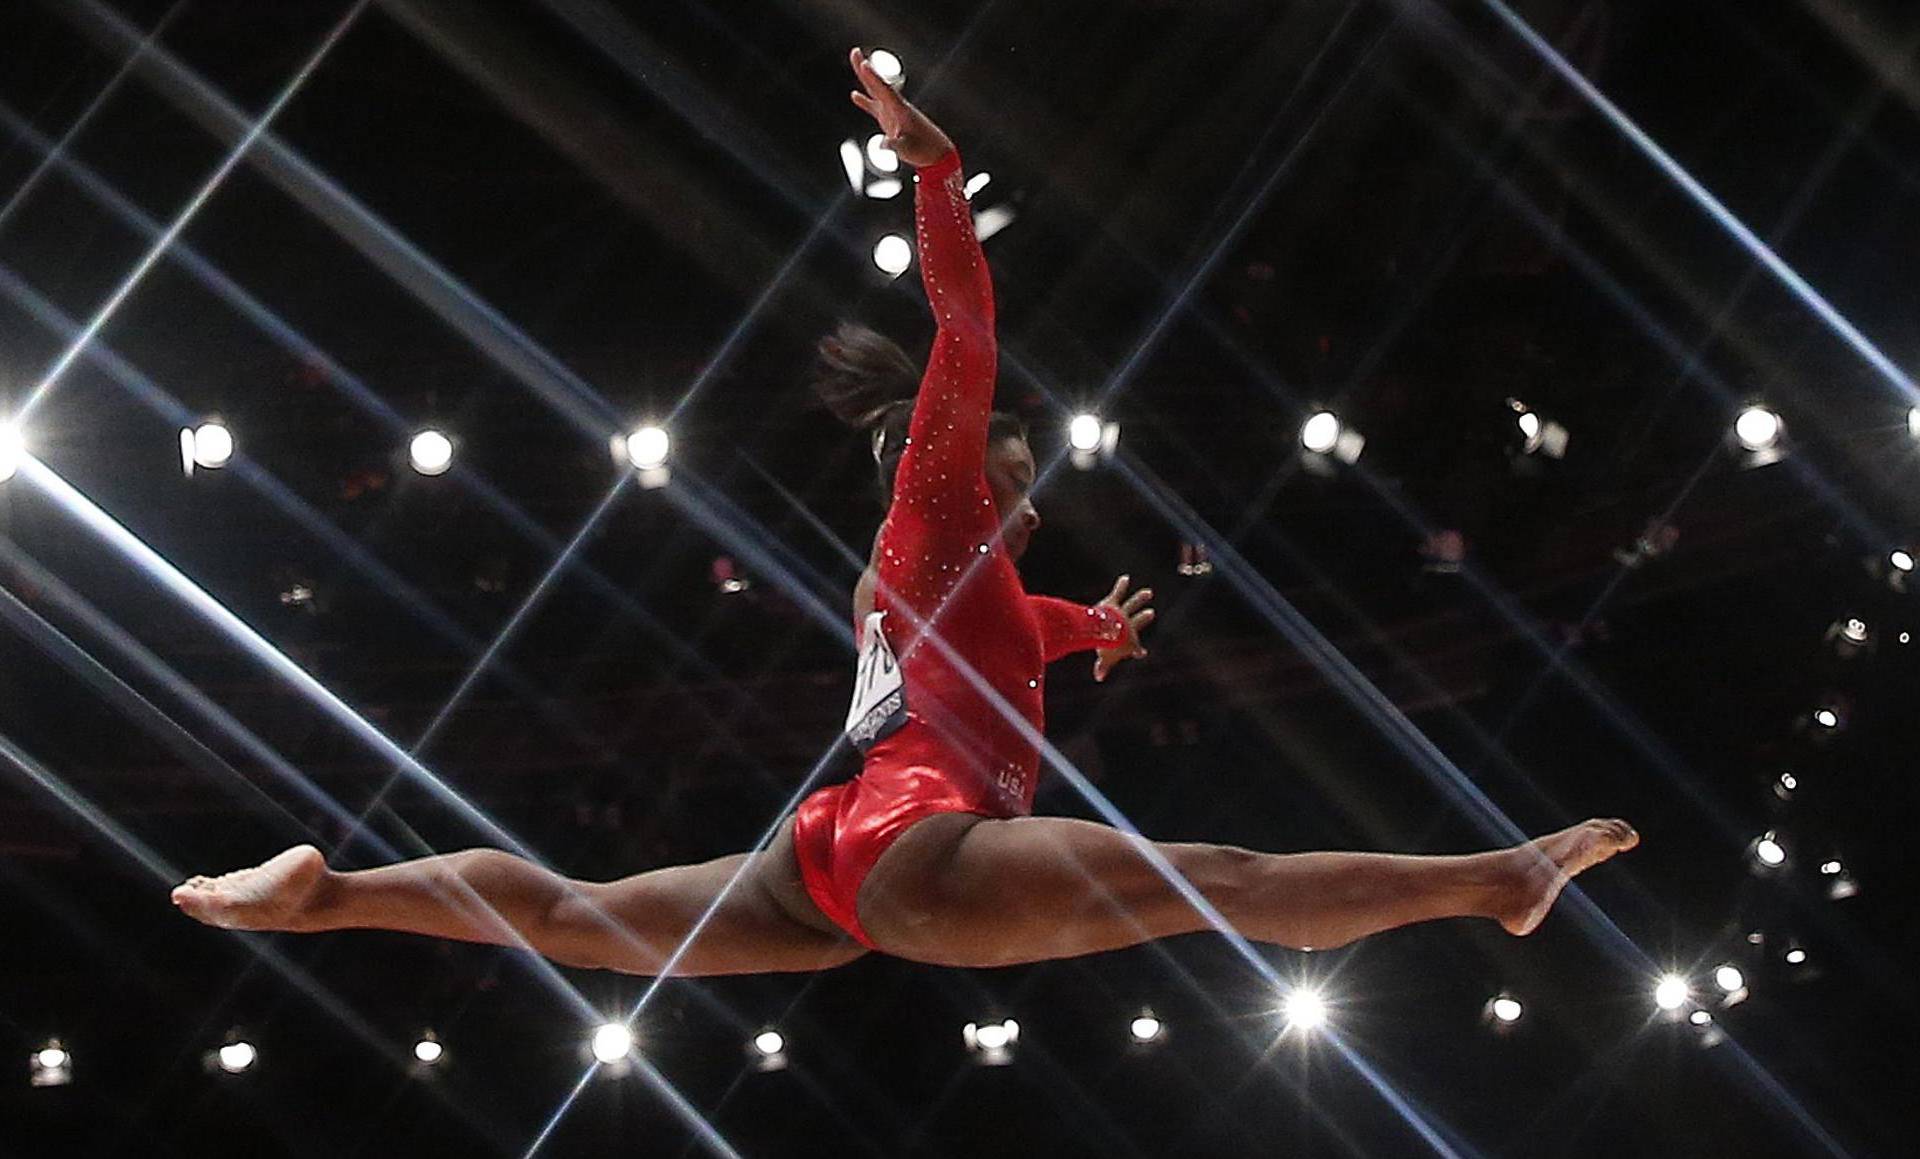 Simone Biles of the U.S competes on the beam during the women's all-round final at the World Gymnastics Championships in Glasgow